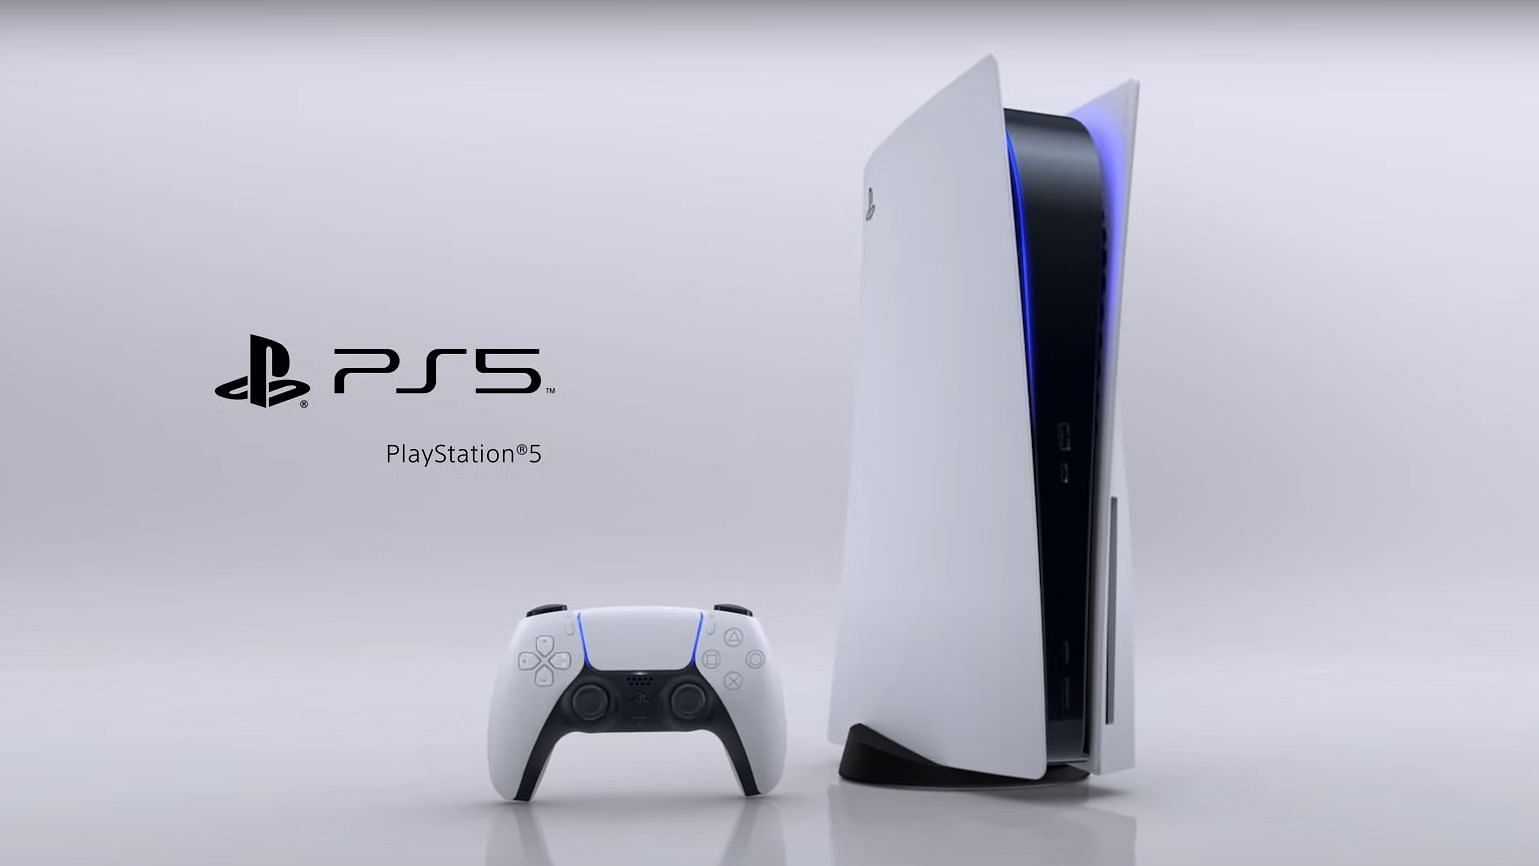 This is the new PlayStation 5.